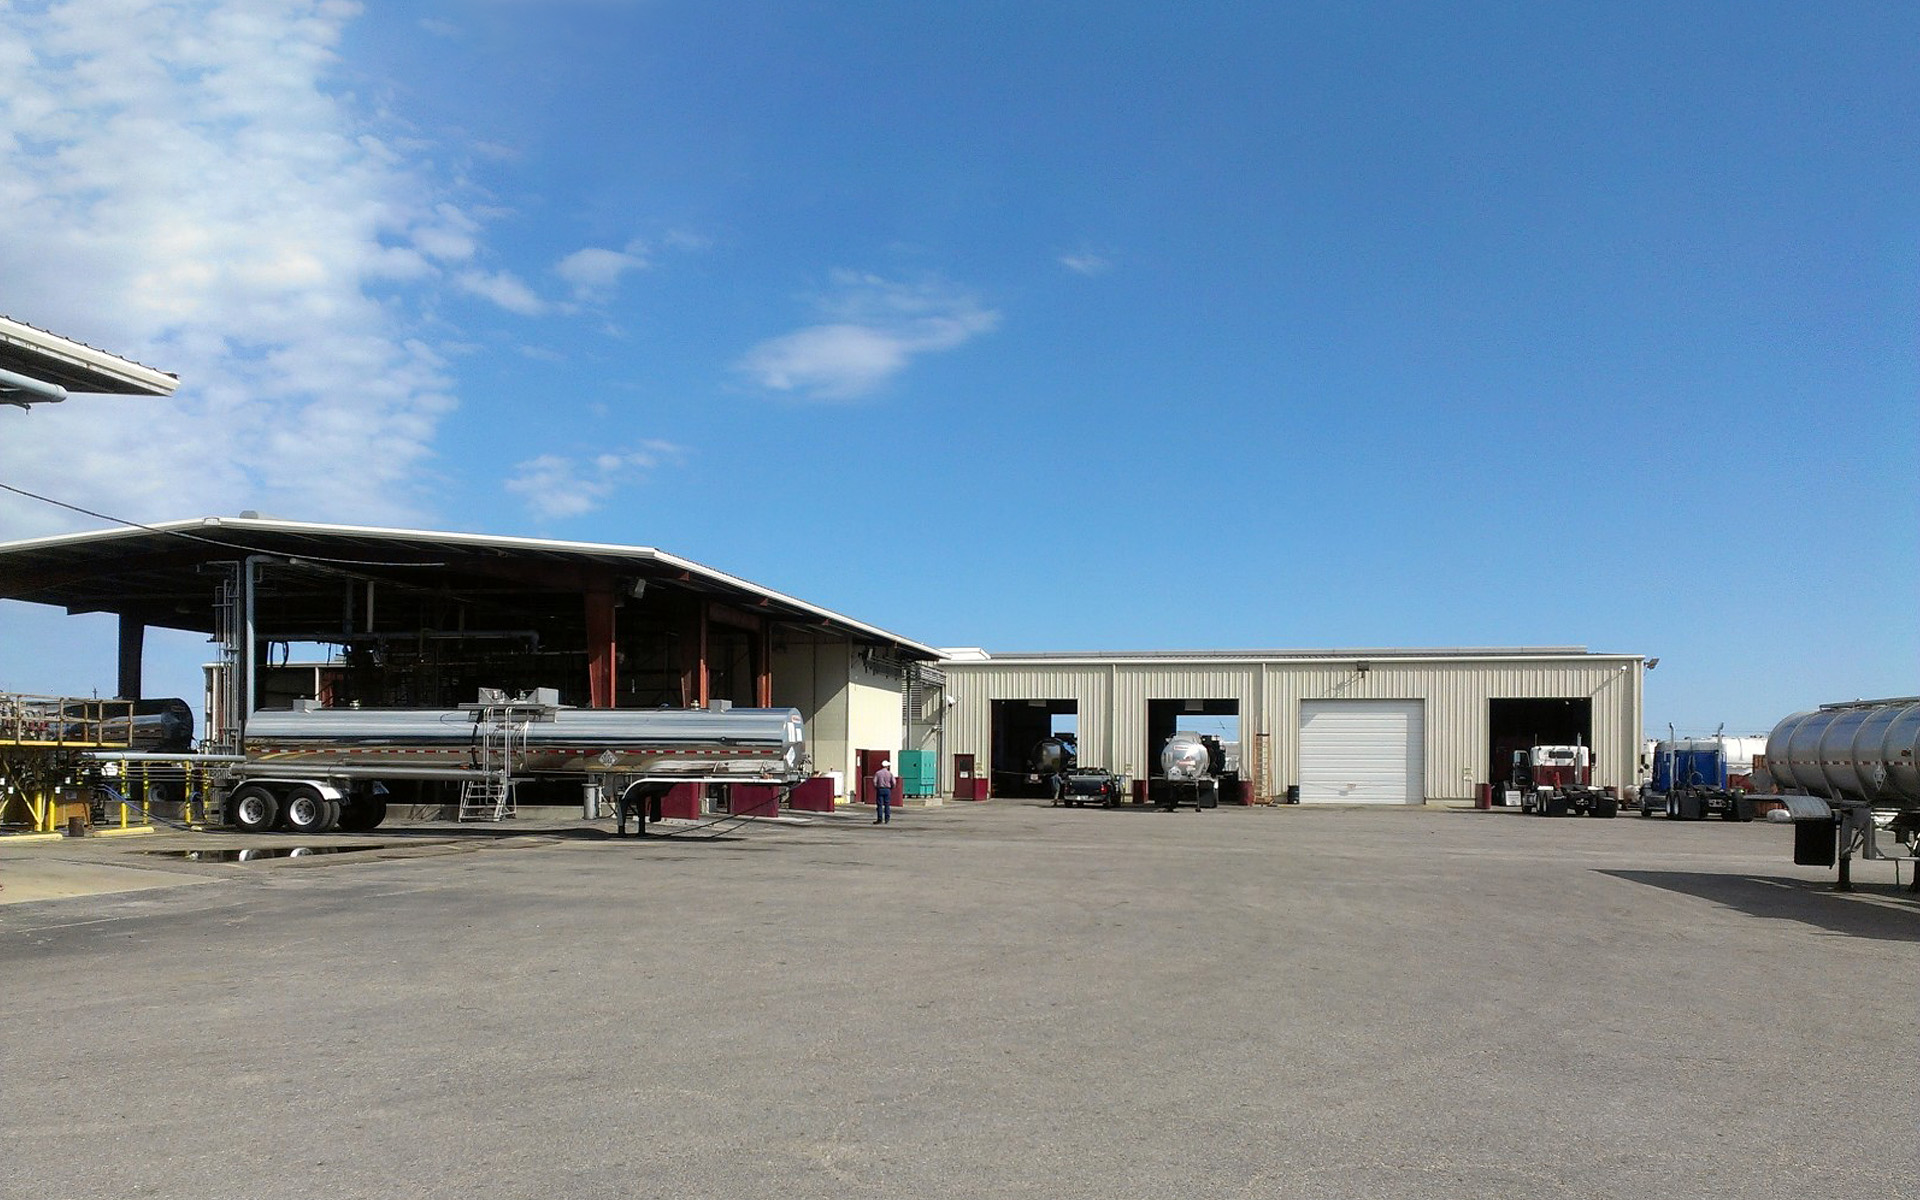 A typical Trimac terminal includes fueling, tank car cleaning, and facilities ranging from maintenance to storage tank farms.